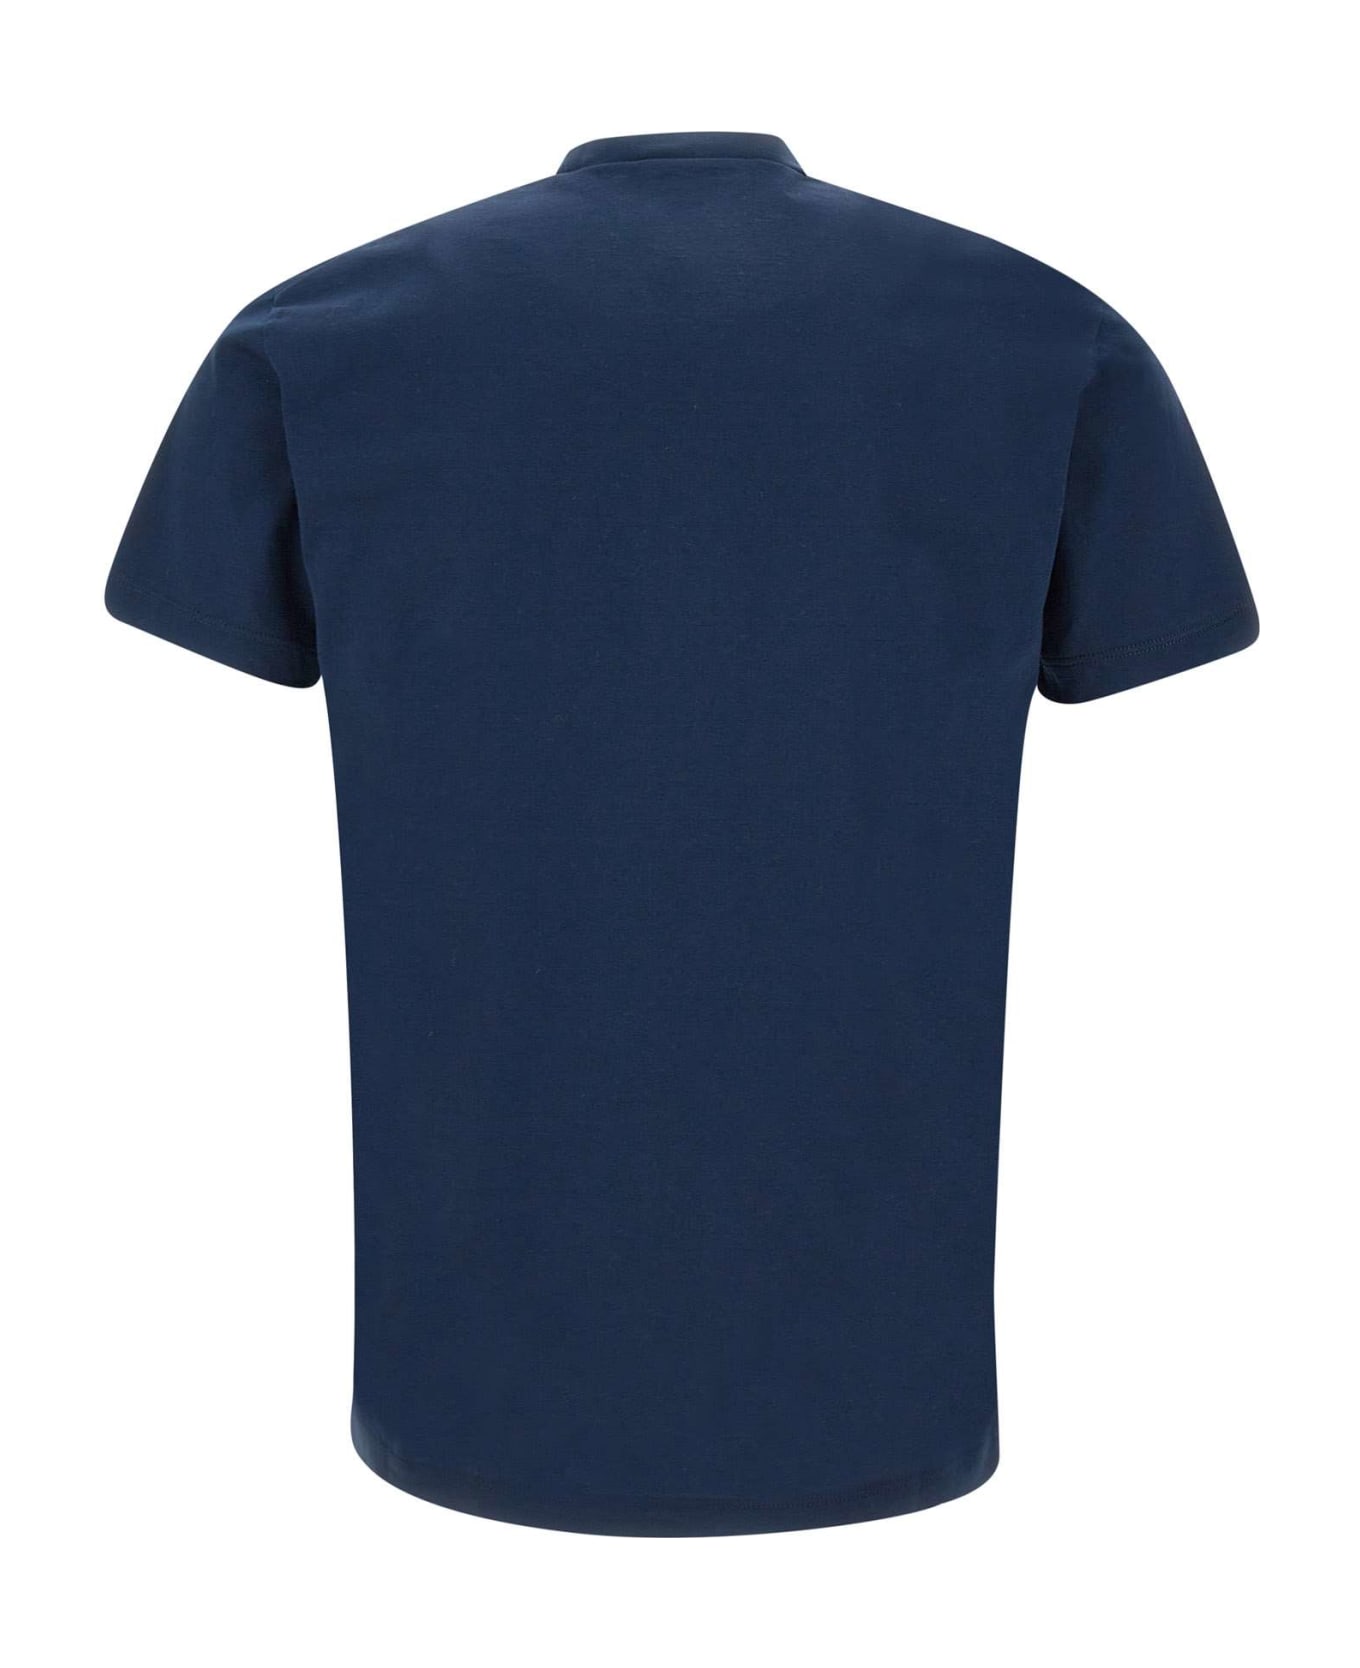 Dsquared2 "cool Fit Tee" Cotton T-shirt - BLUE